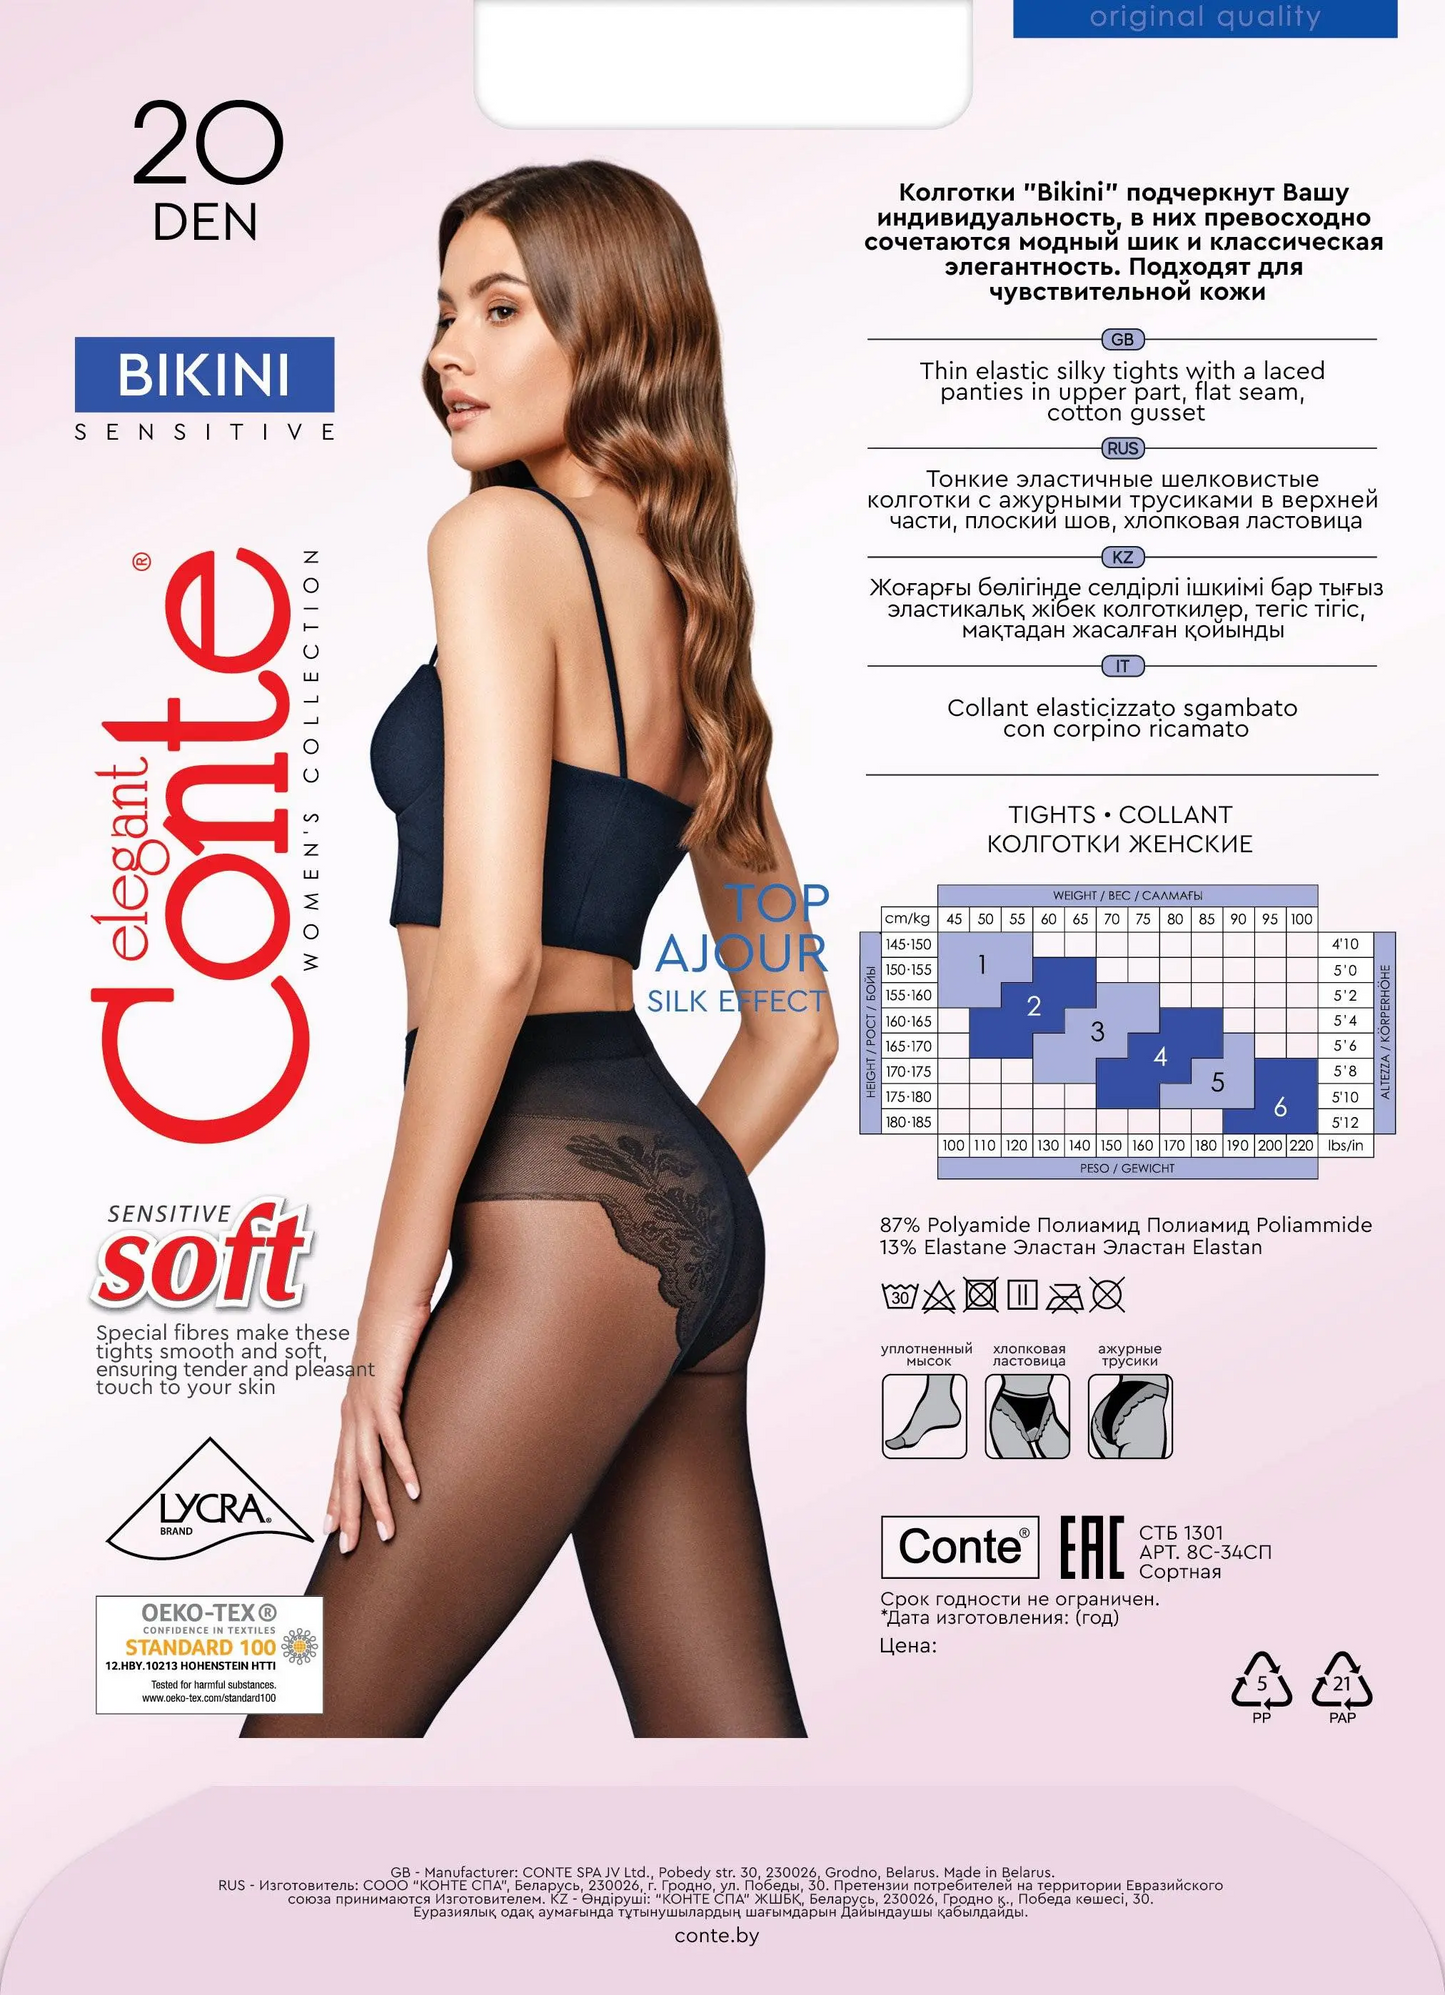 Conte Bikini Soft 20 Den - Classic Women's Tights with Laced Panties (8С-34СП)